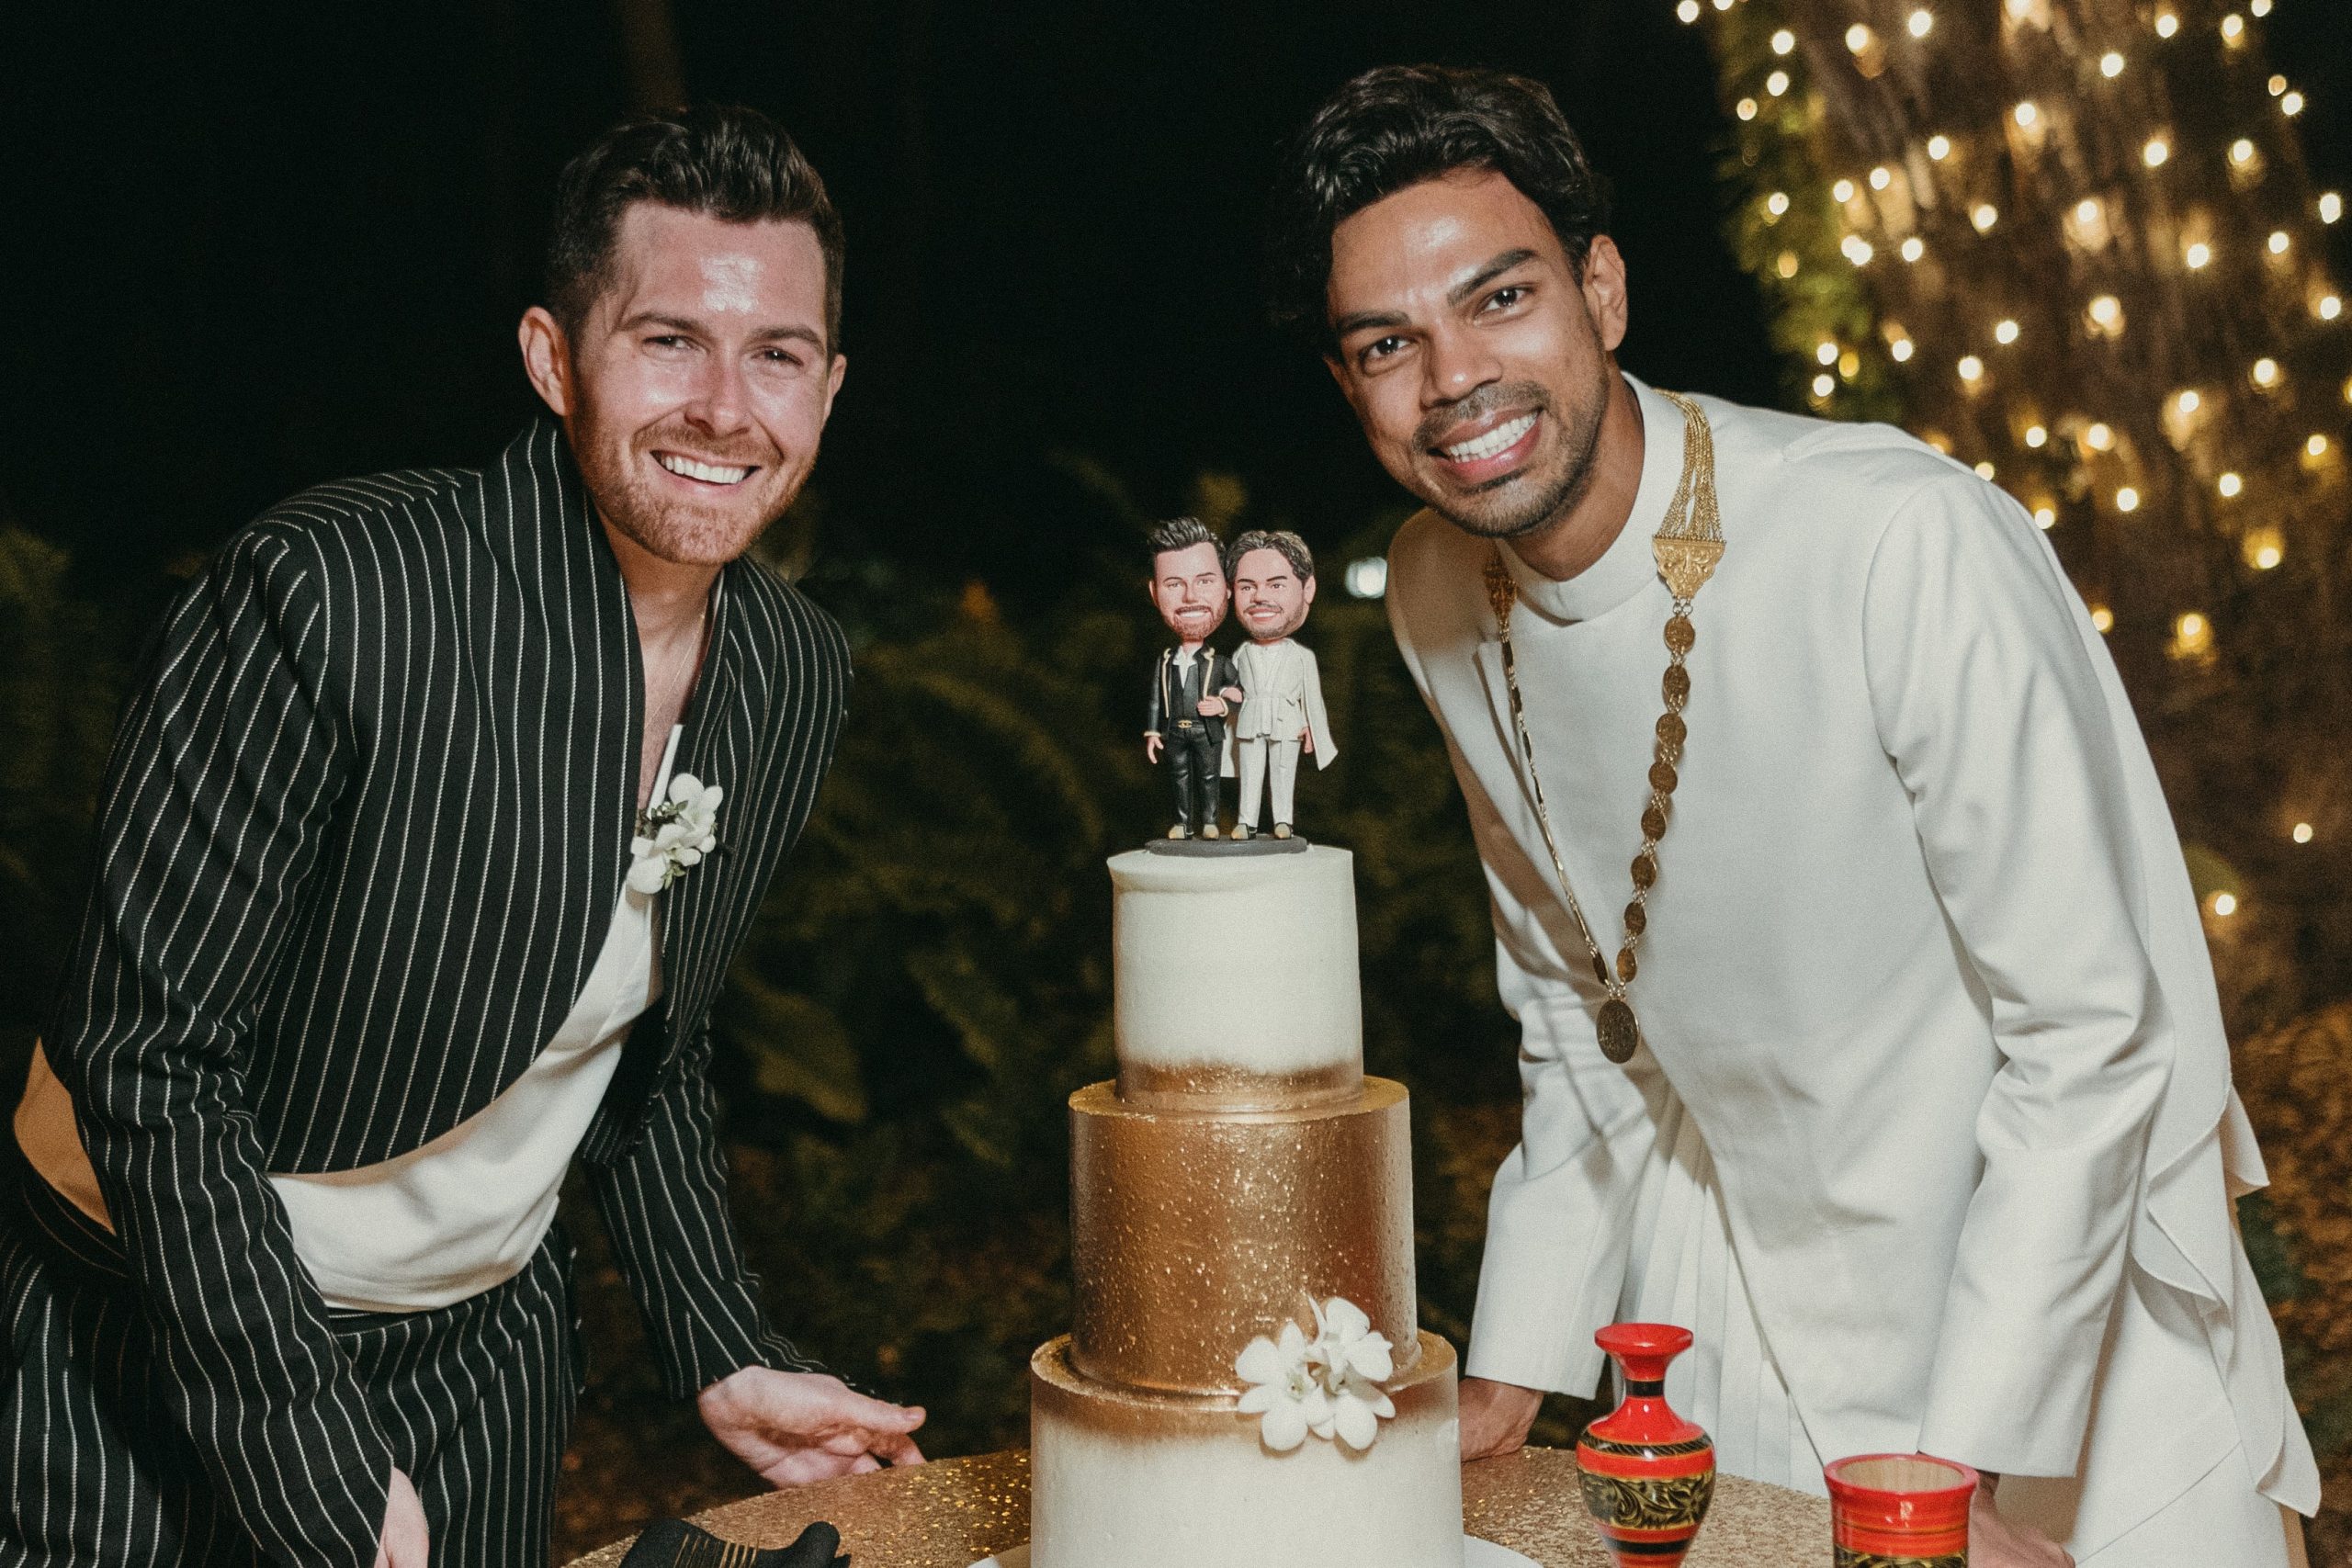 Grooms happily posing next to their wedding cake, topped with two bobble heads that are modeled after them